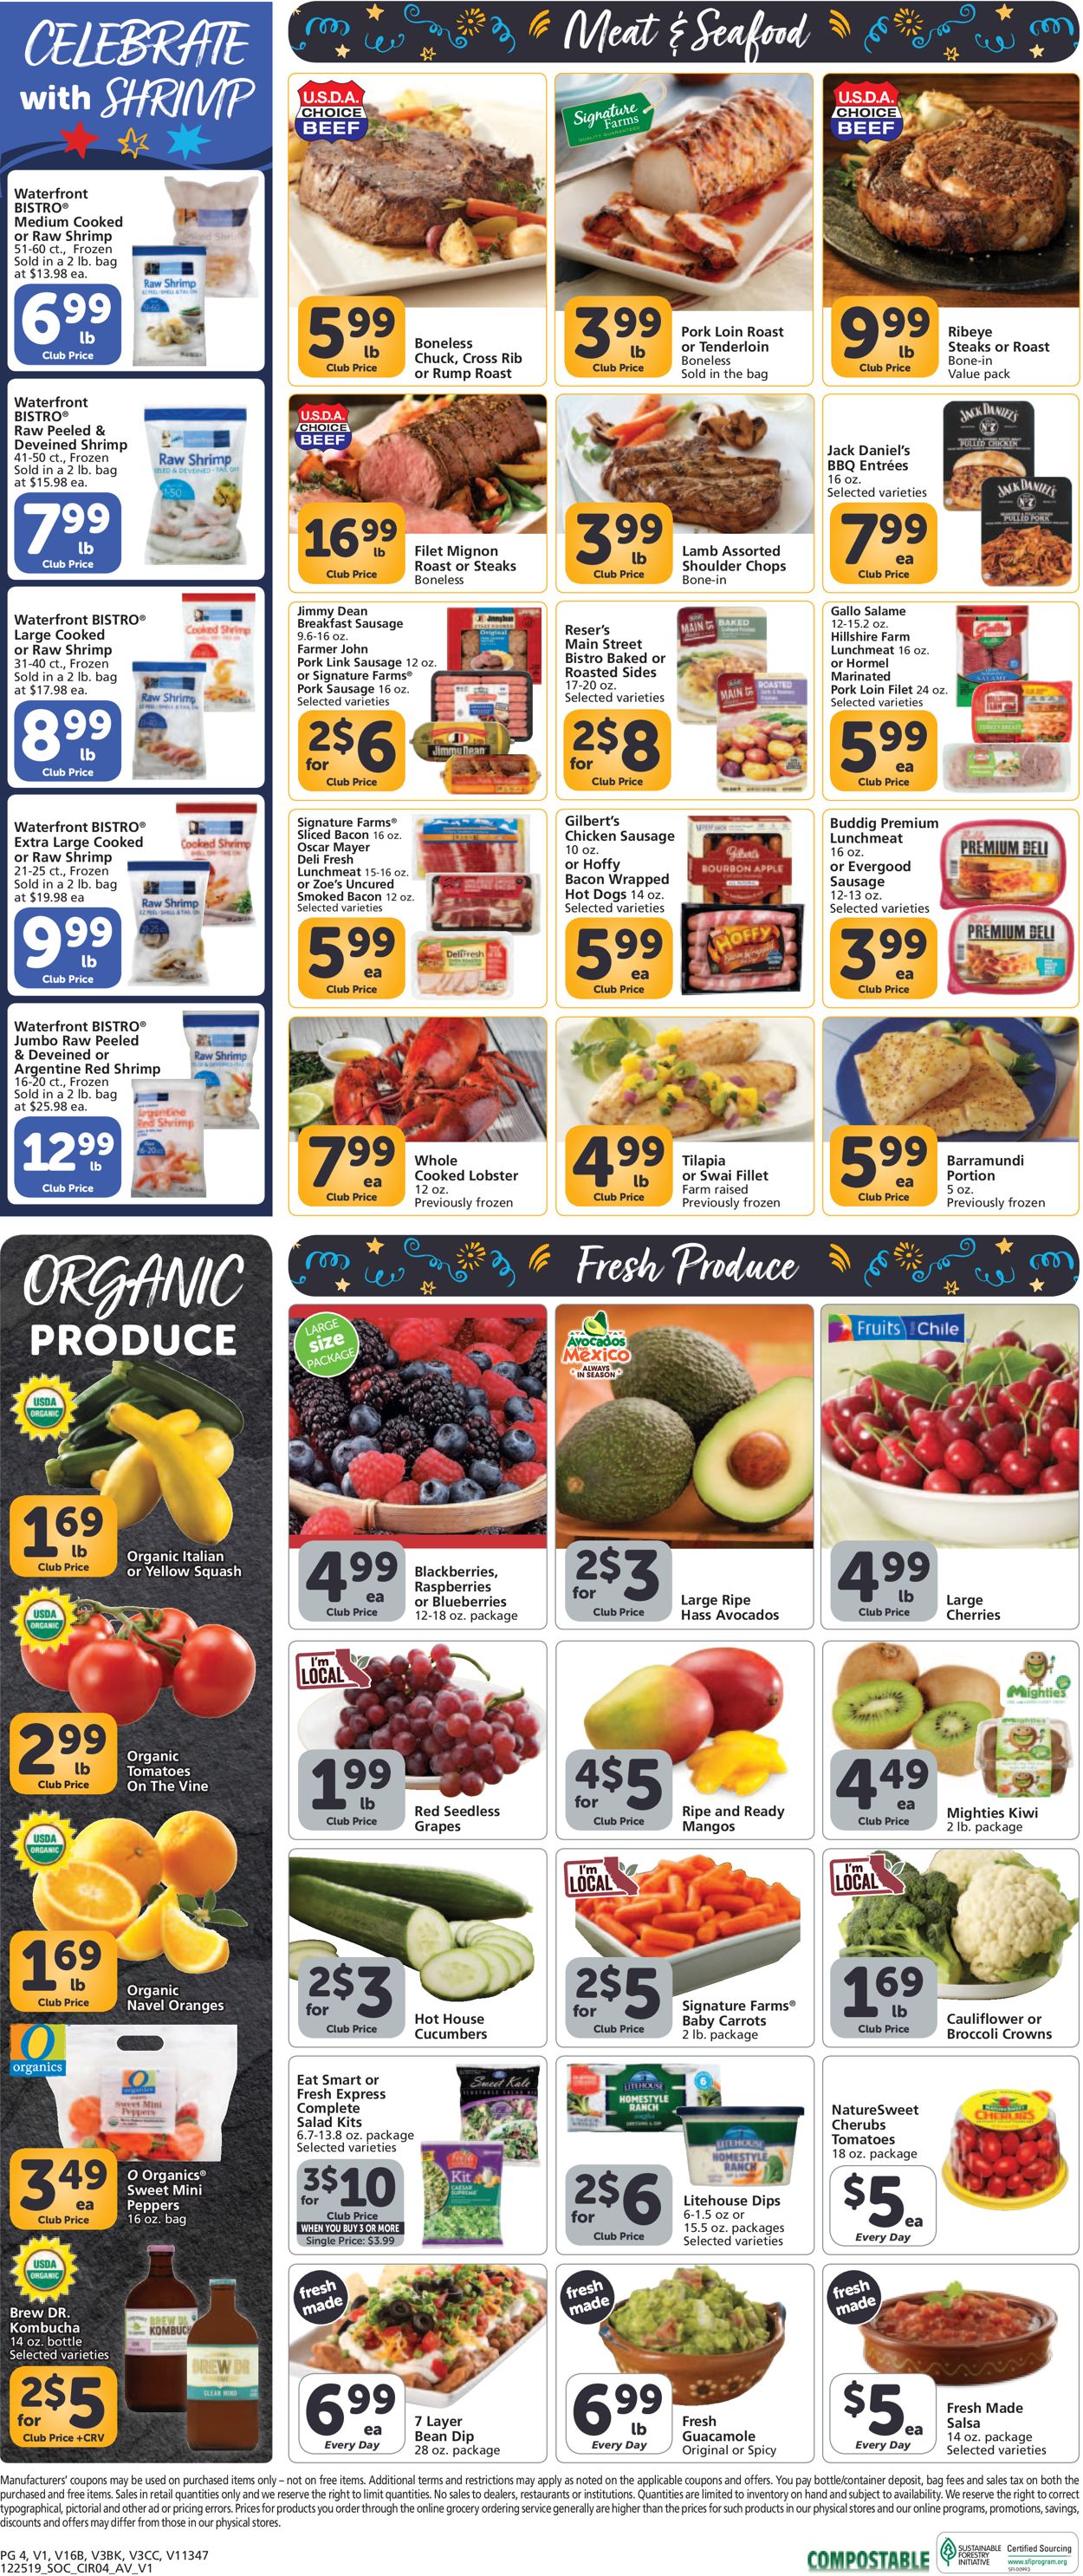 Vons - New Years's Ad 2019/2020 Weekly Ad Circular - valid 12/28-12/31/2019 (Page 5)